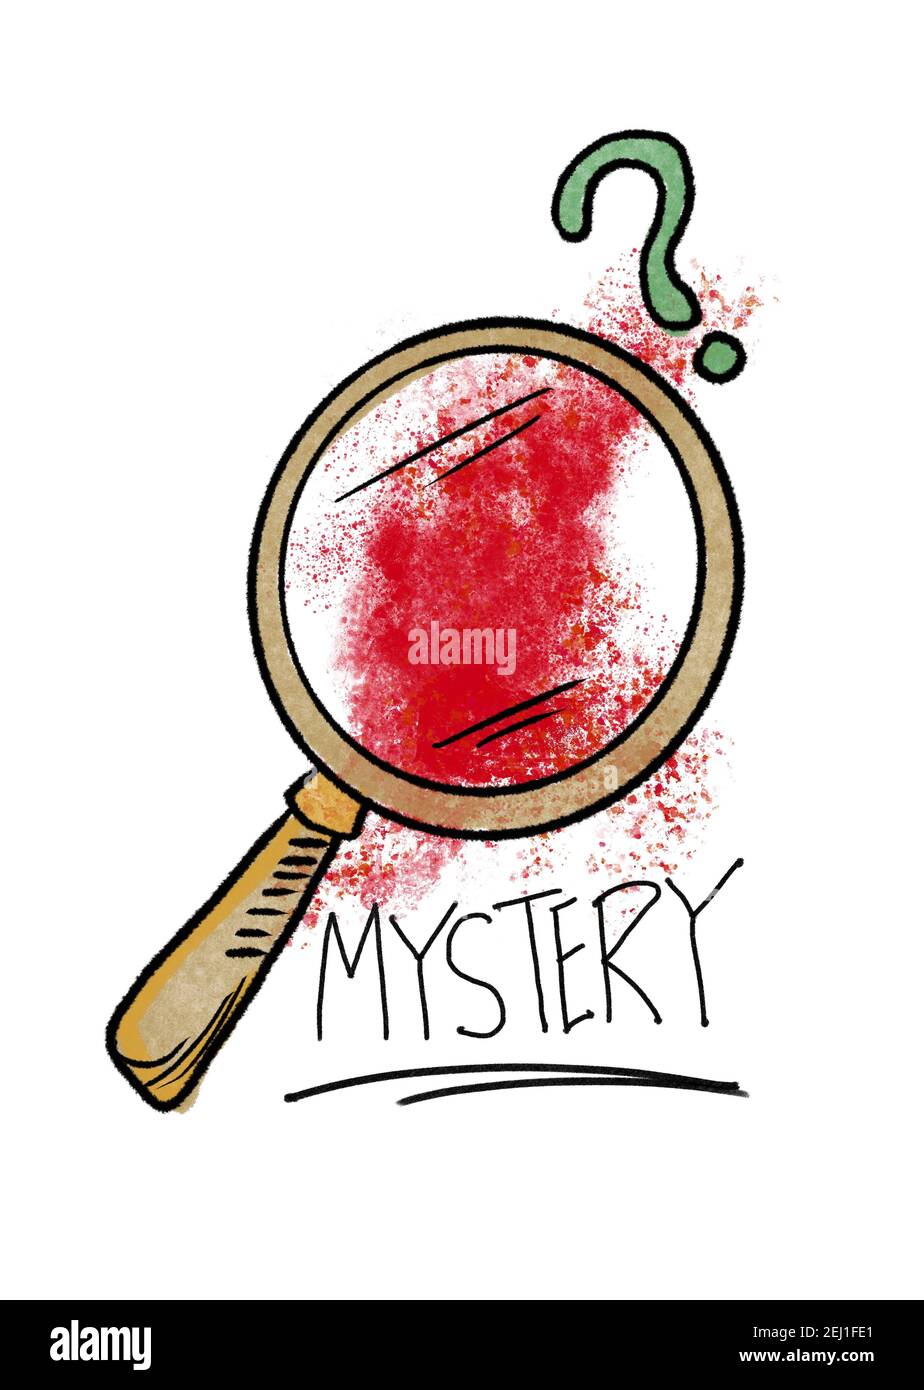 magnifying glass mystery illustration Stock Photo